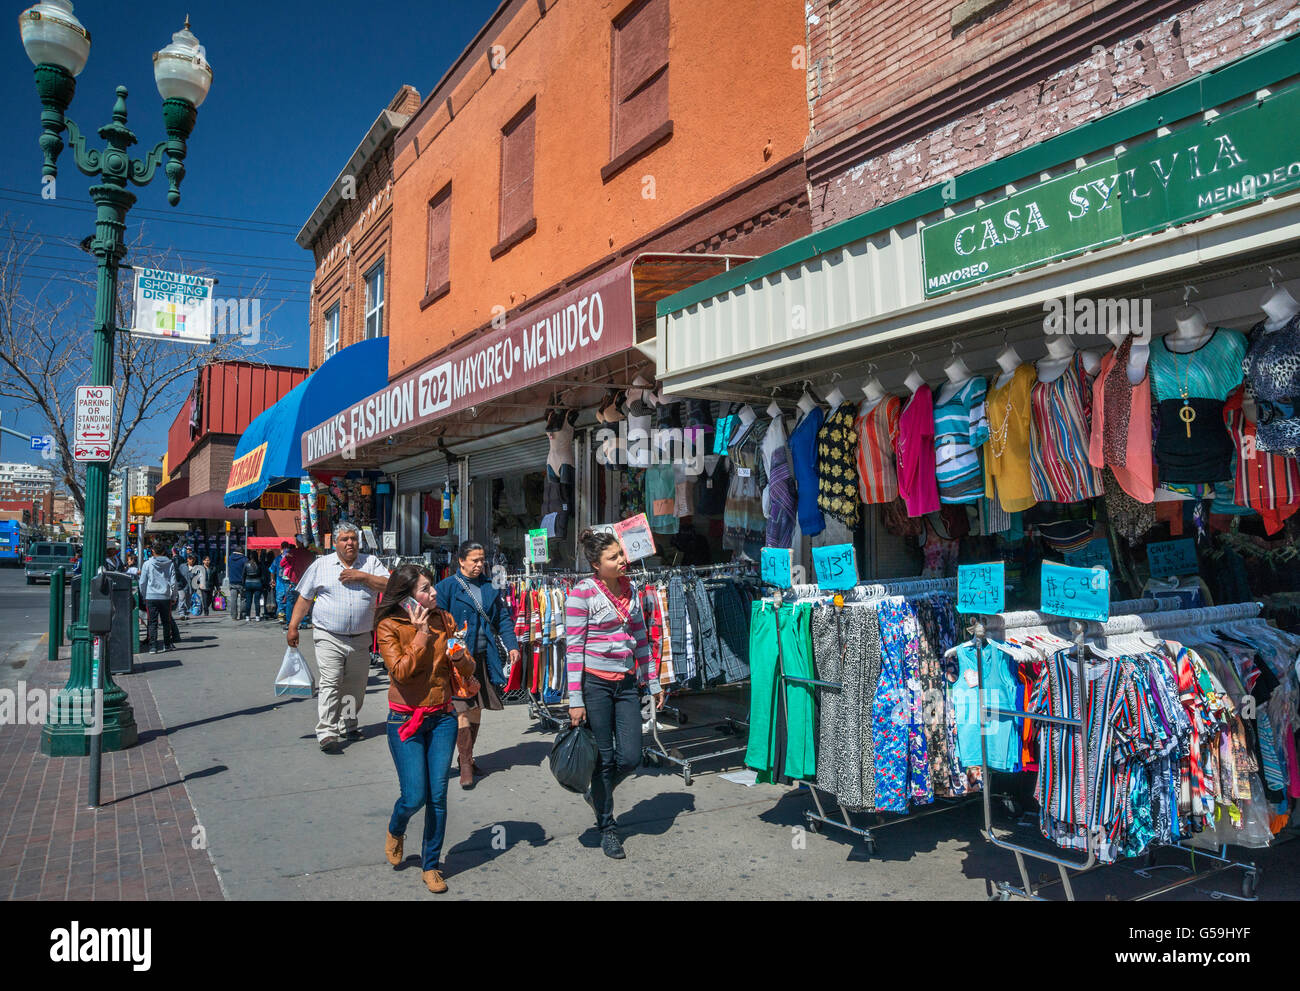 shoppers-at-stores-on-south-el-paso-street-in-el-paso-texas-usa-G59HYF.jpg